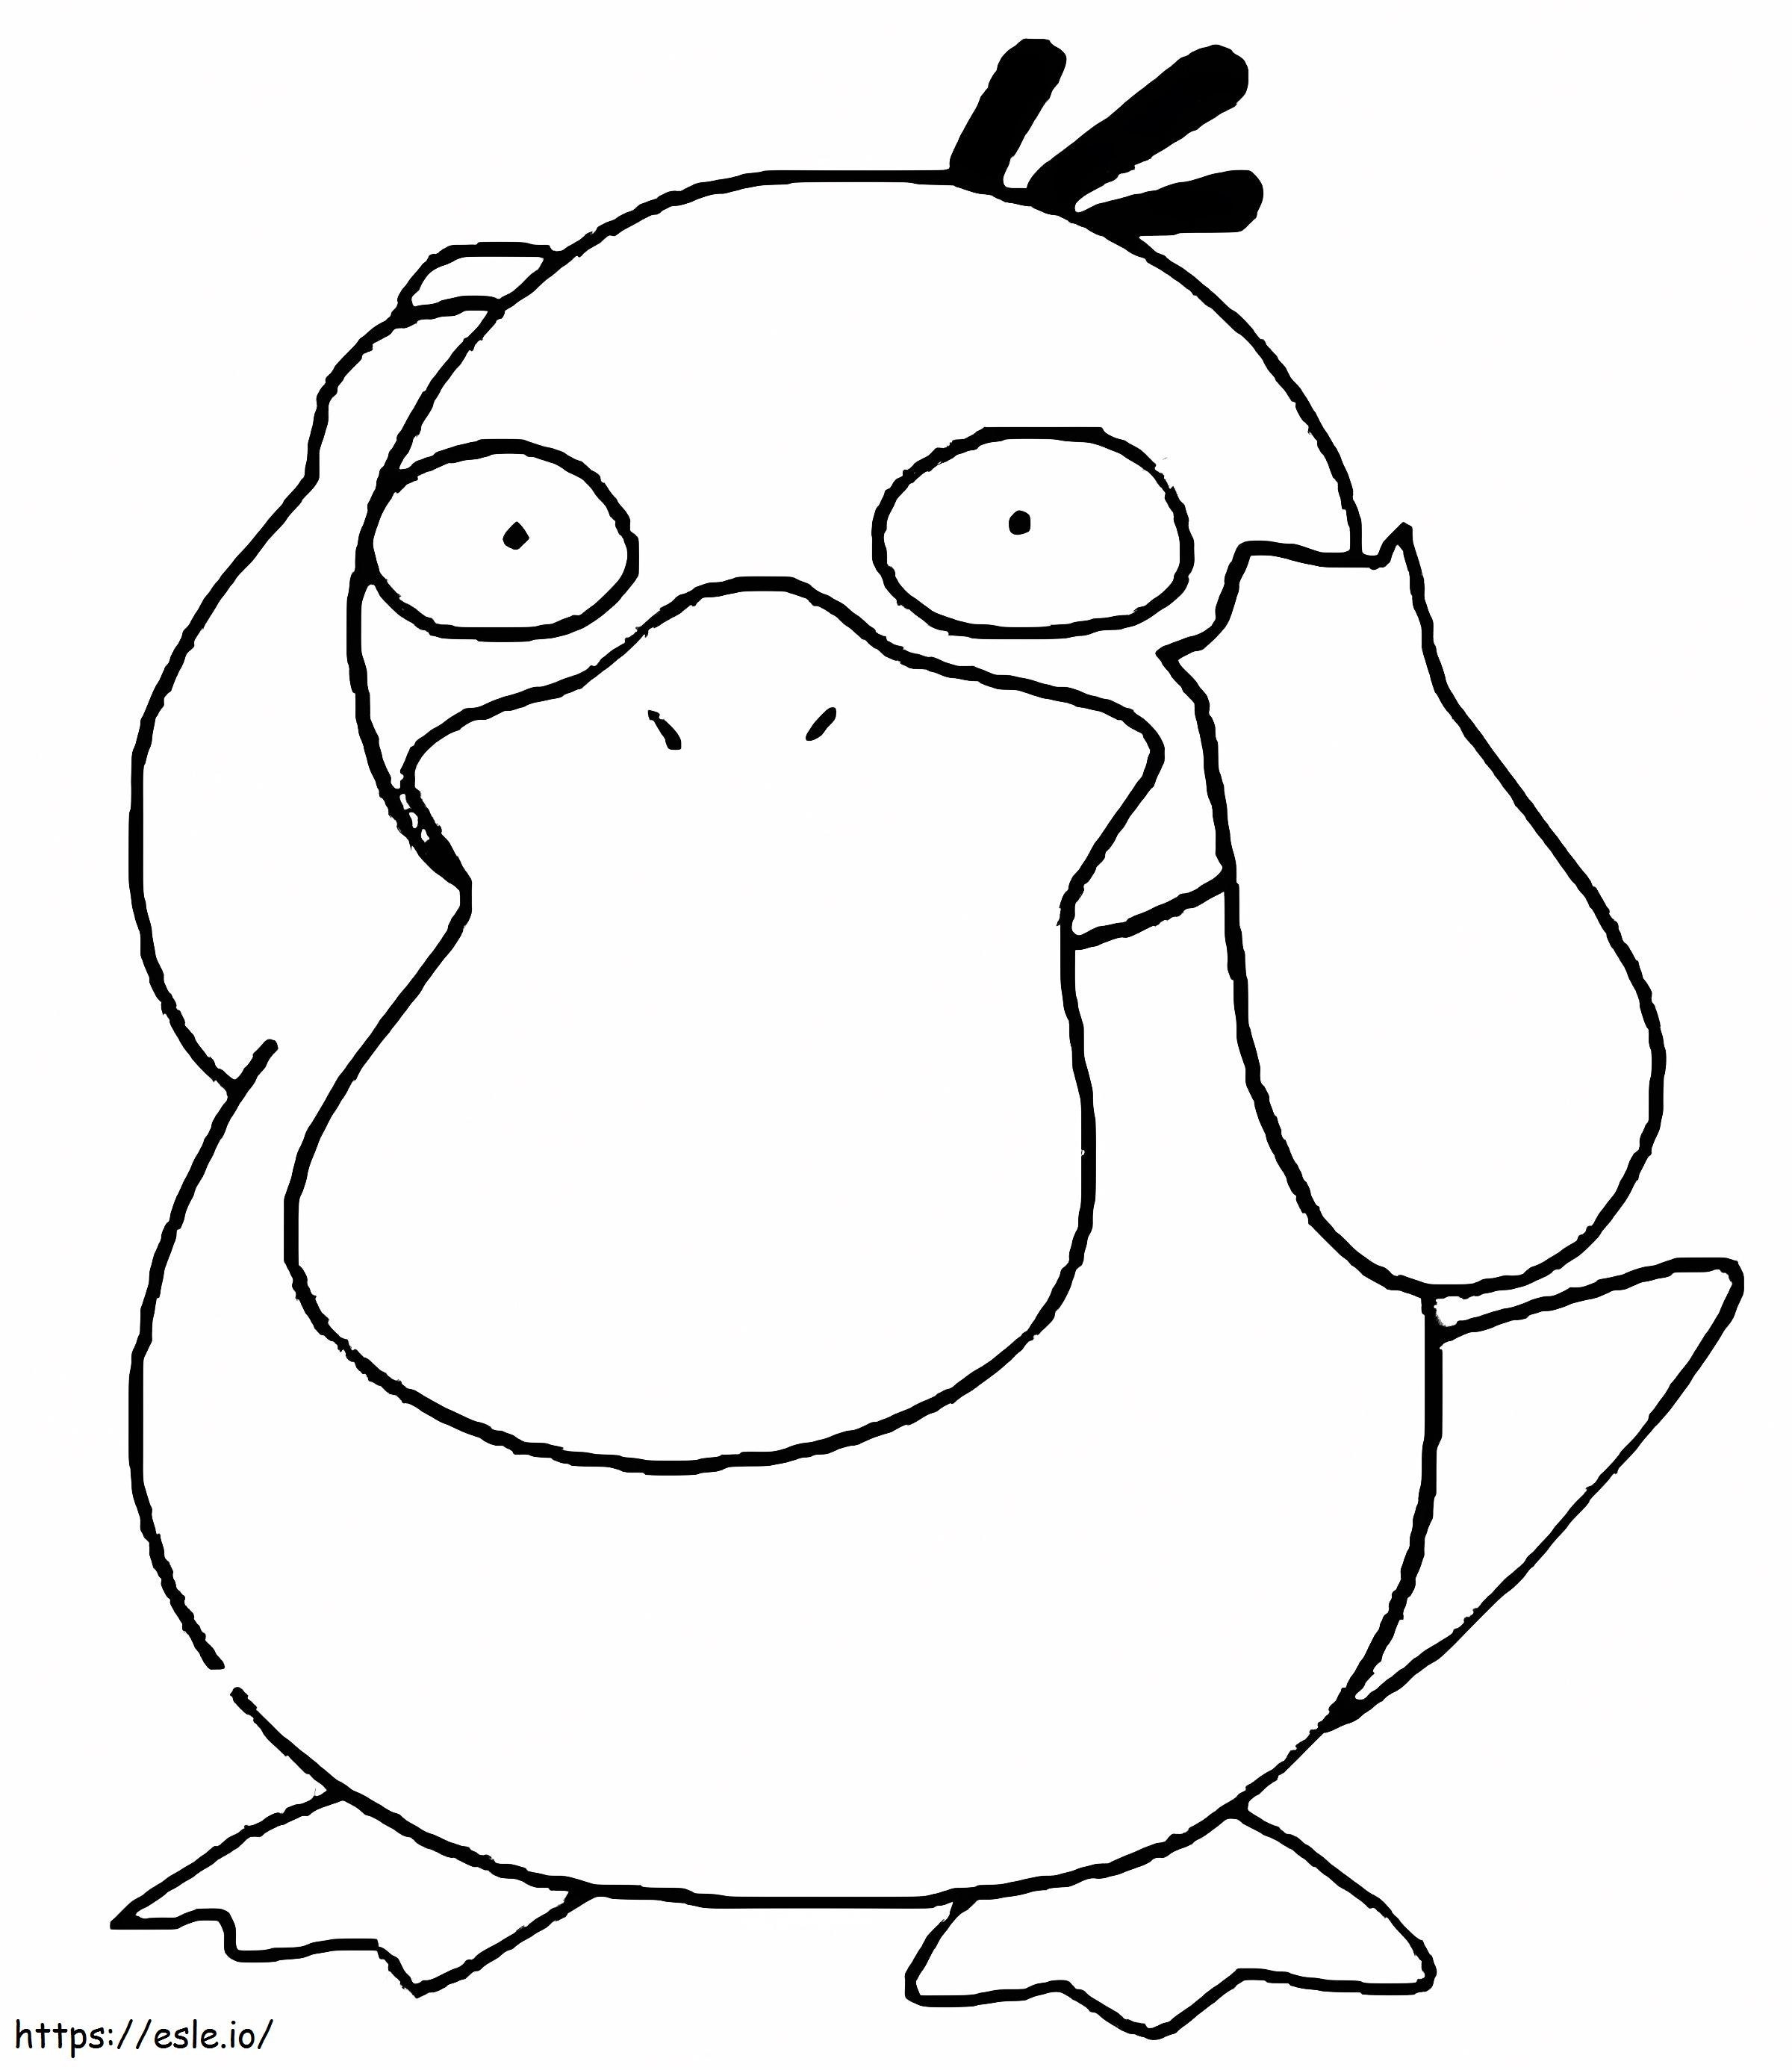 Psyduck A Pokemon coloring page